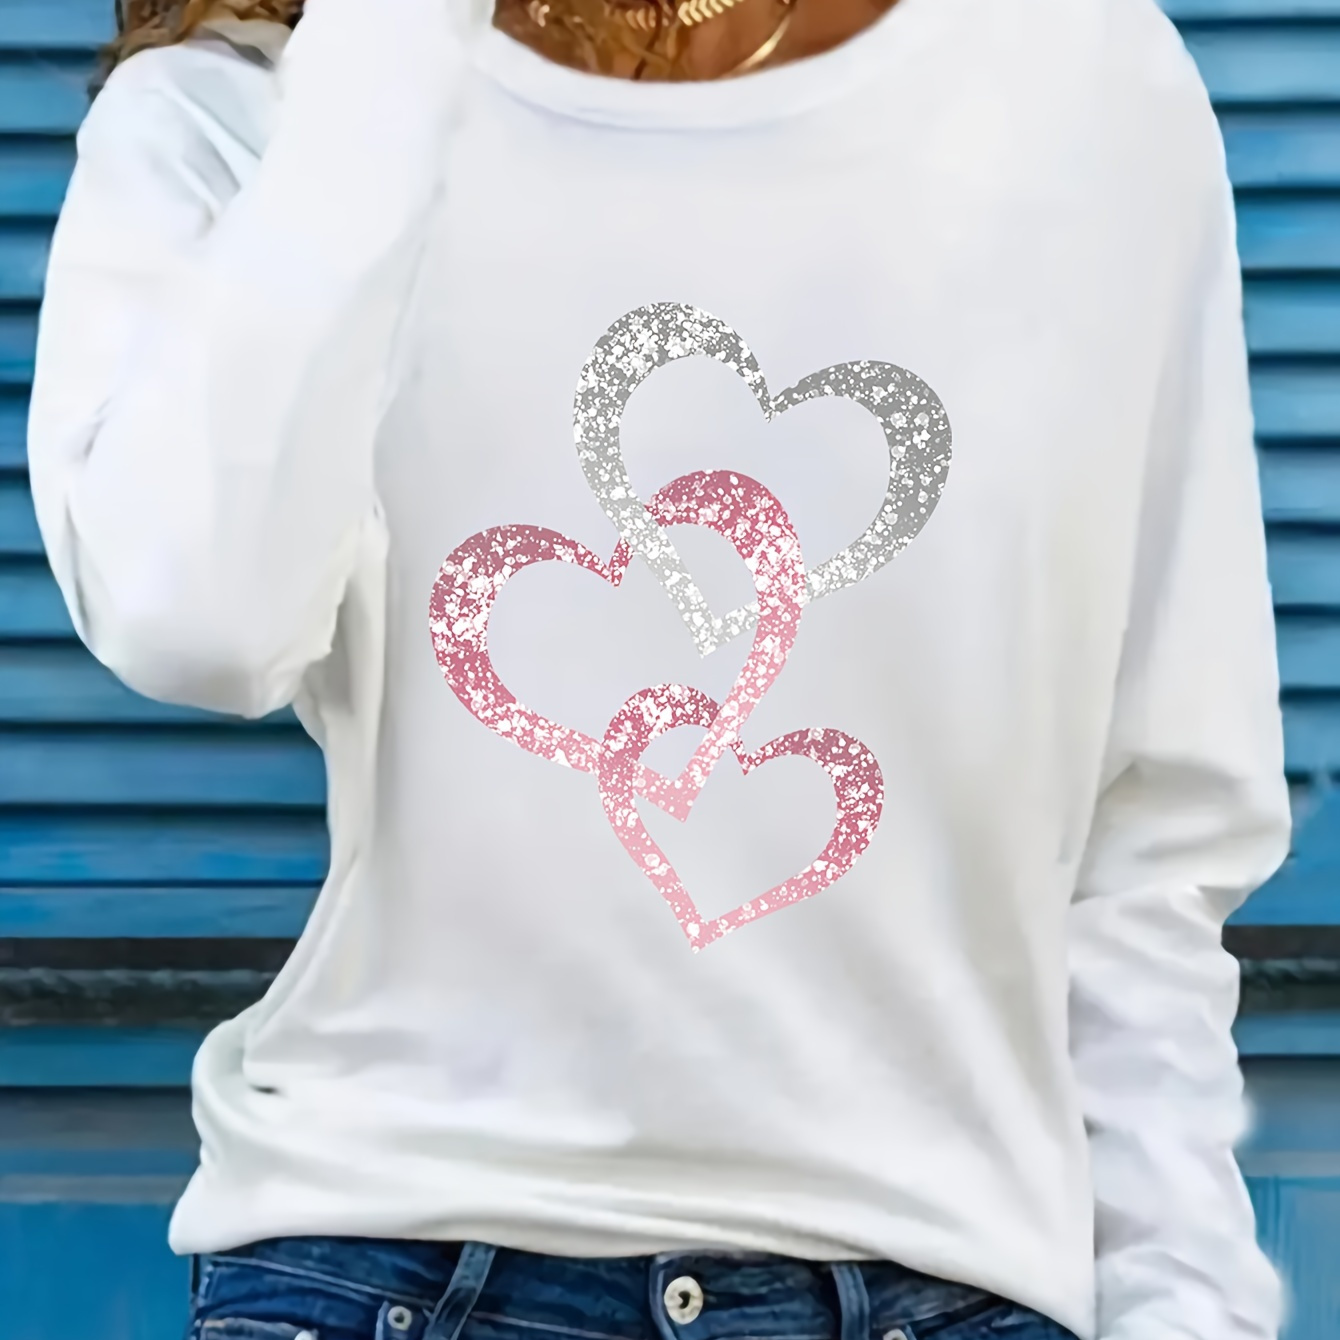 

Heart Graphic Print T-shirt, Long Sleeve Crew Neck Casual Top For Spring & Fall, Women's Clothing